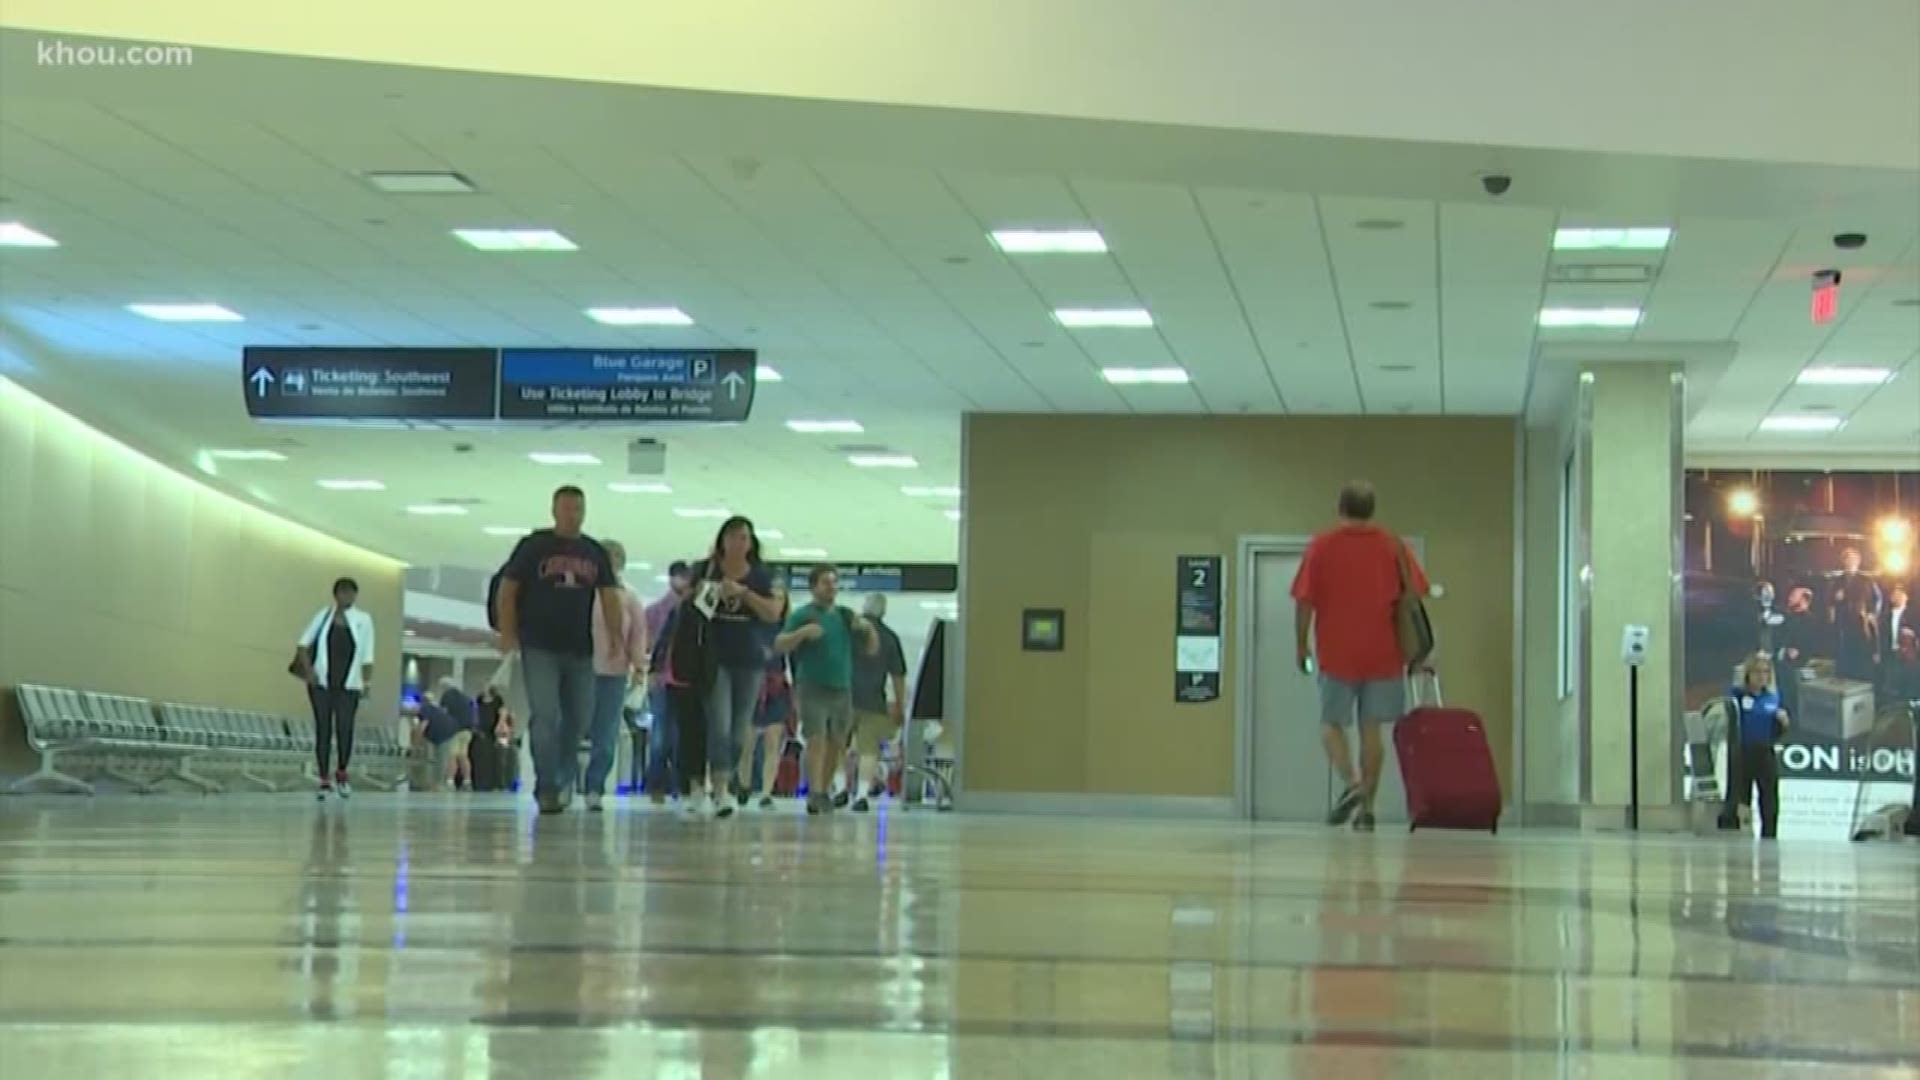 A new program designed to fight human trafficking is taking off at Houston airports.